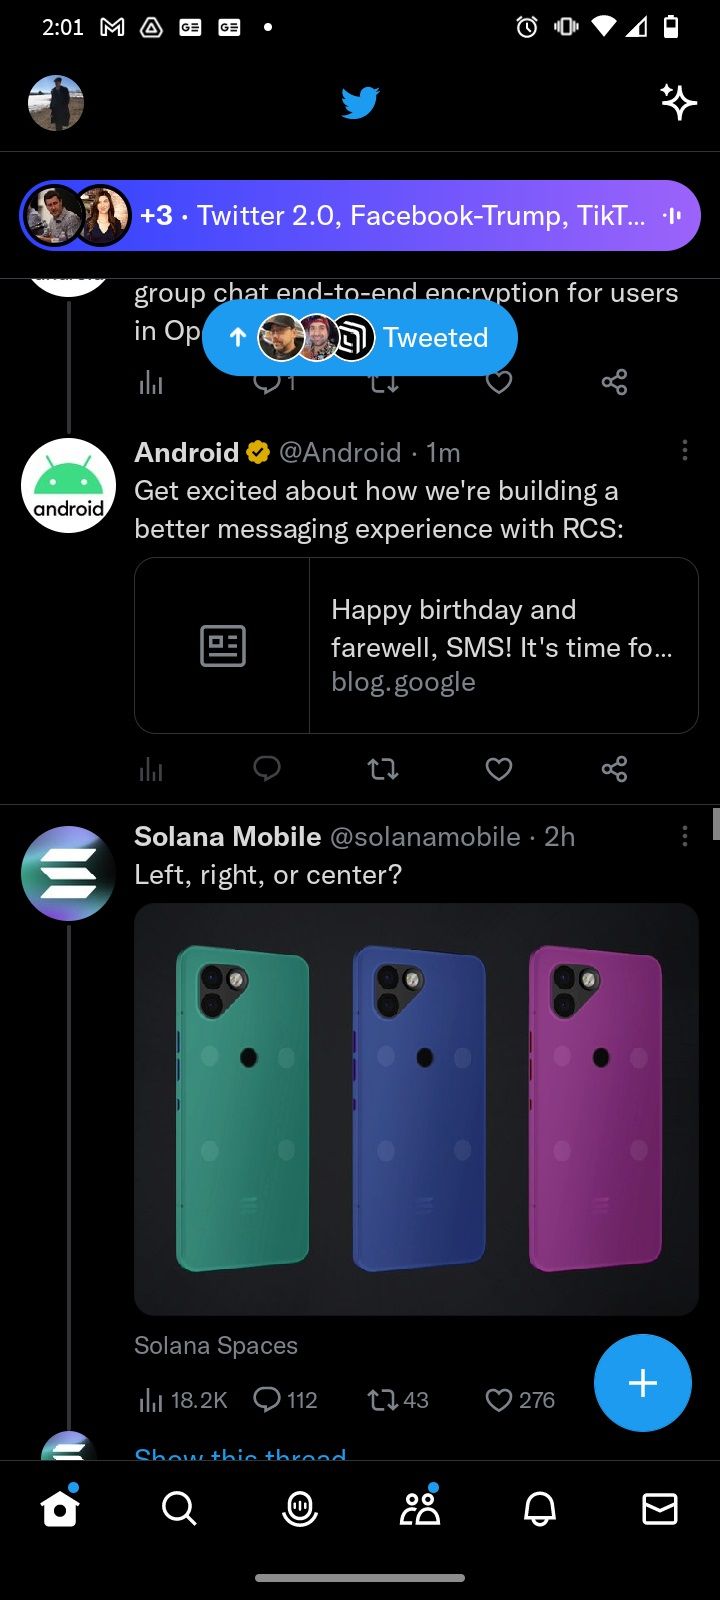 On a mobile device, a live Twitter feed is displayed on the feed